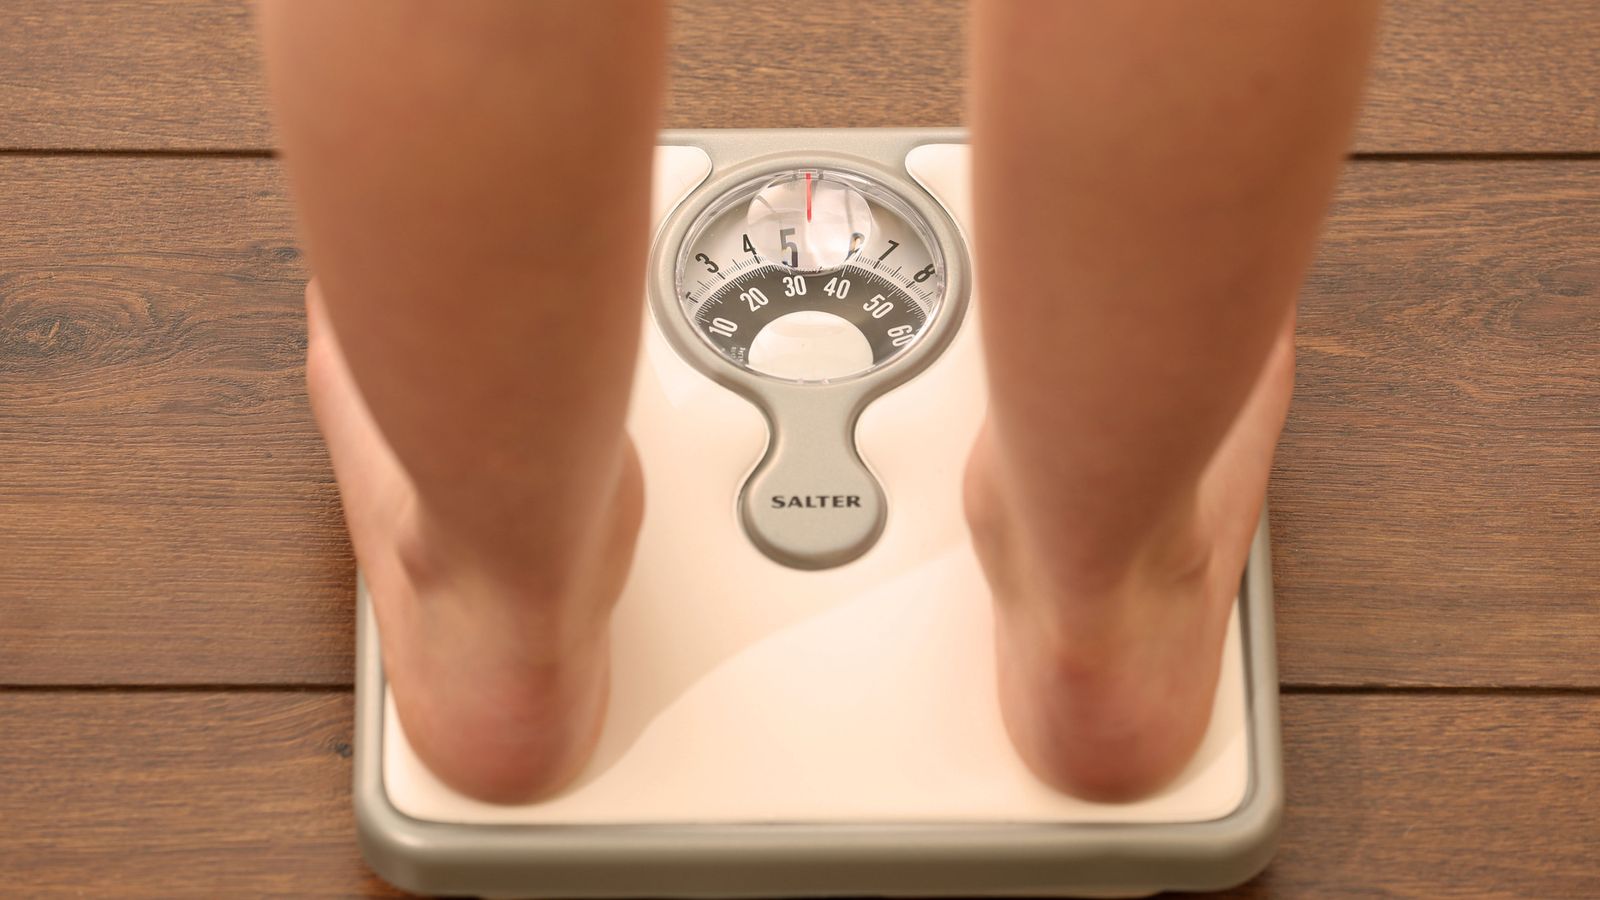 Number of obese people worldwide surpasses one billion